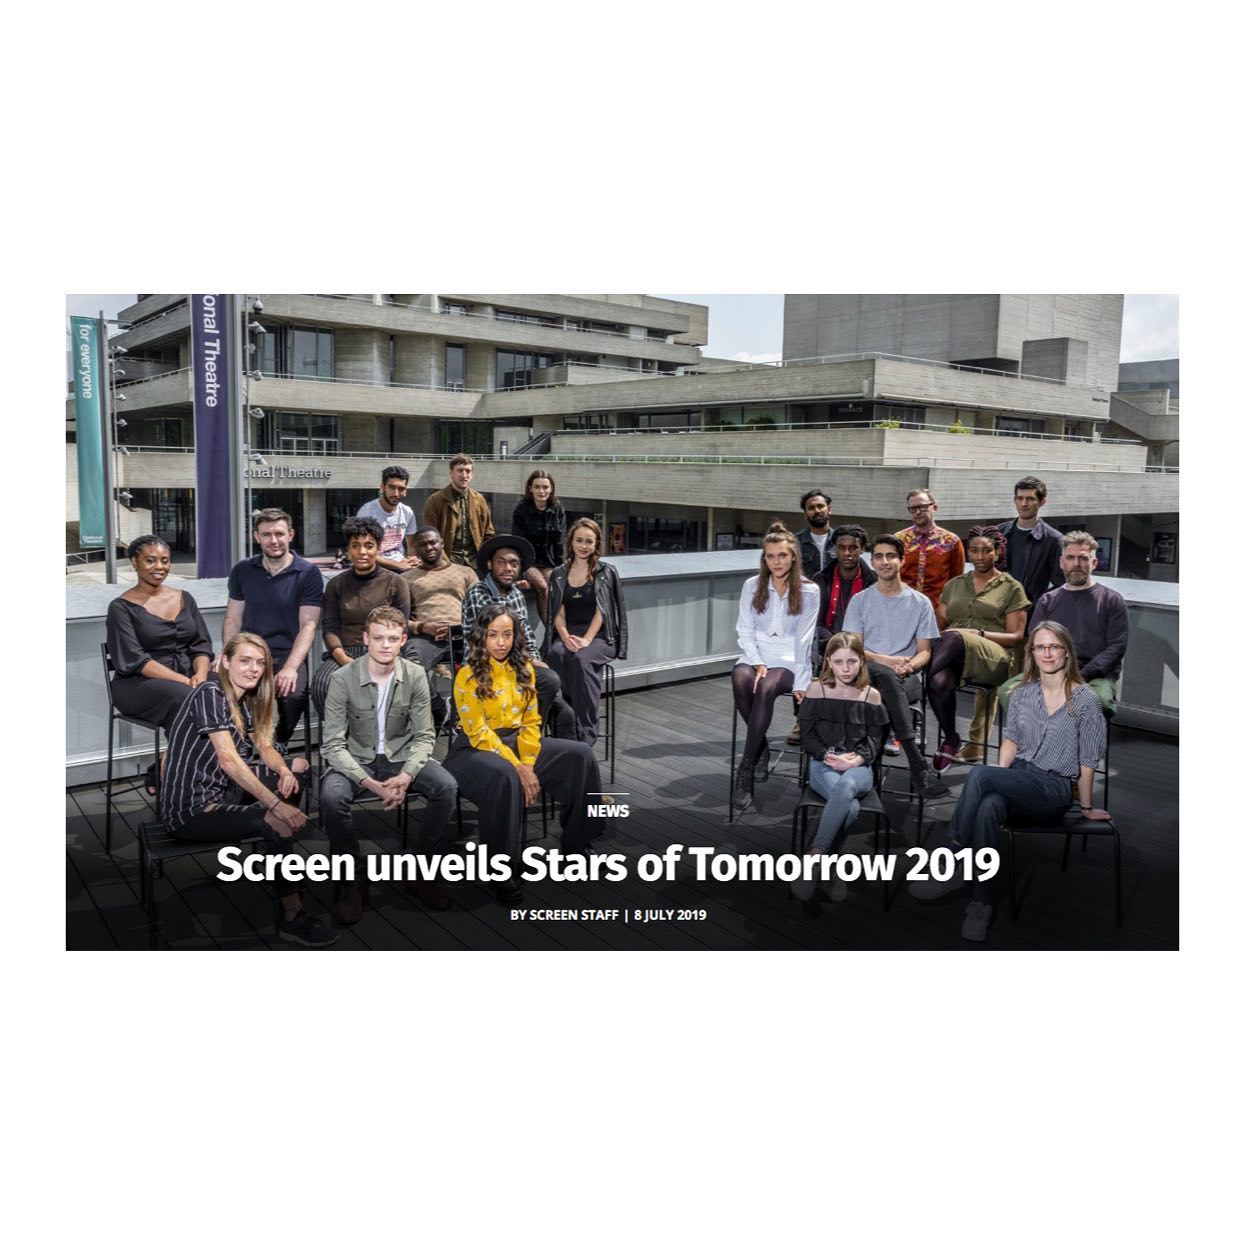 Congratulations to @dixie.egerickx and @synnkarlsen who have been named as this years @screendaily ‘Stars of Tomorrow 2019’ 
.
.
.
.
.